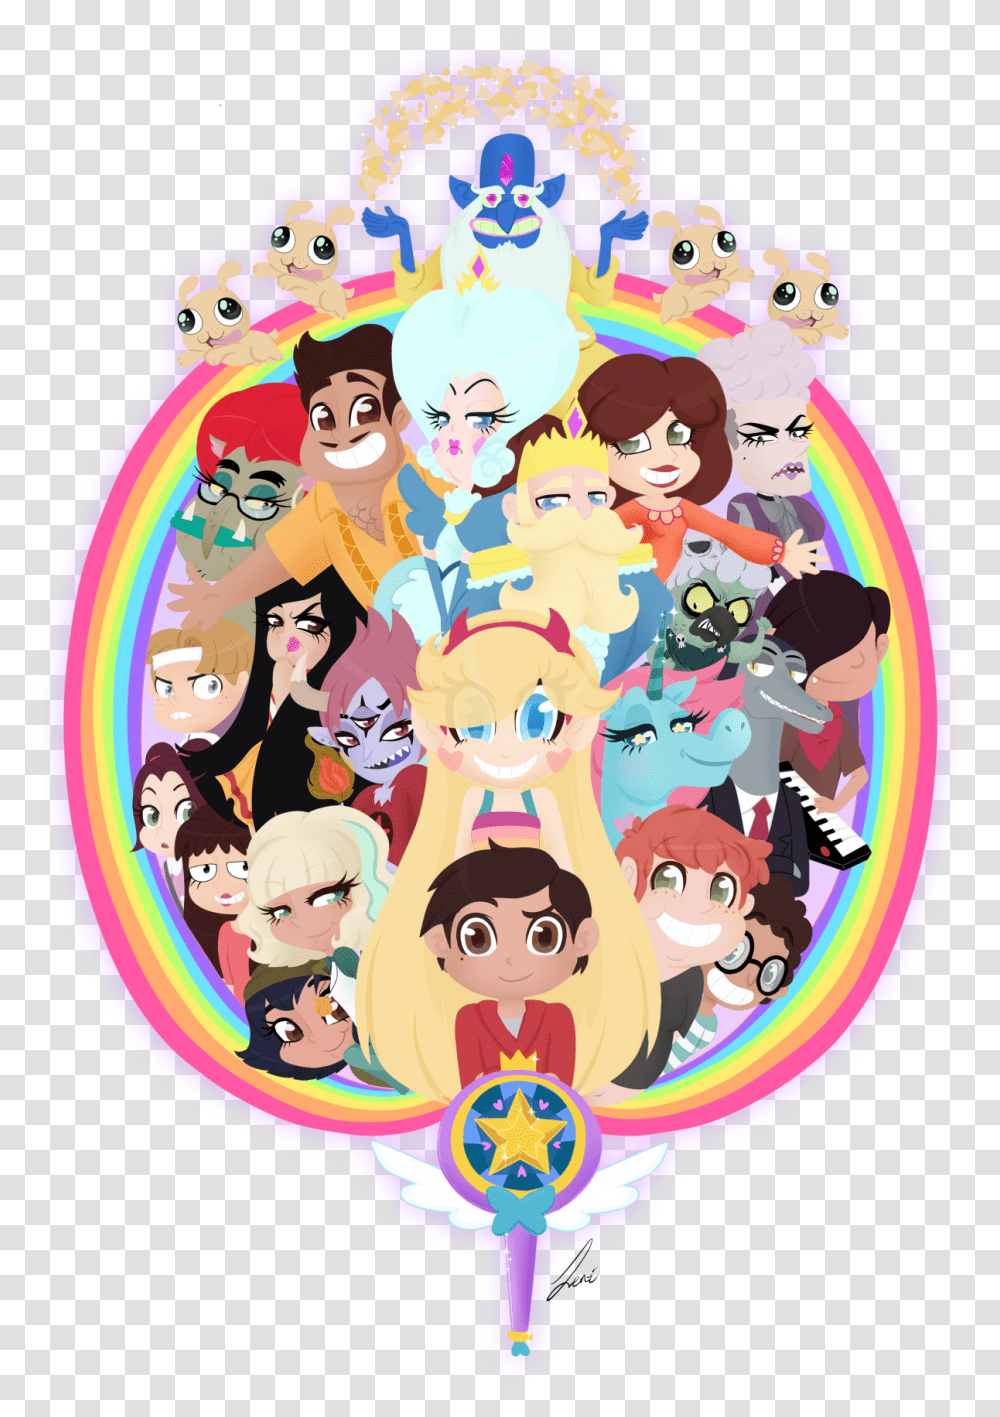 Star Vs The Forces Of Evil Wallpaper Faces, Person, Collage Transparent Png